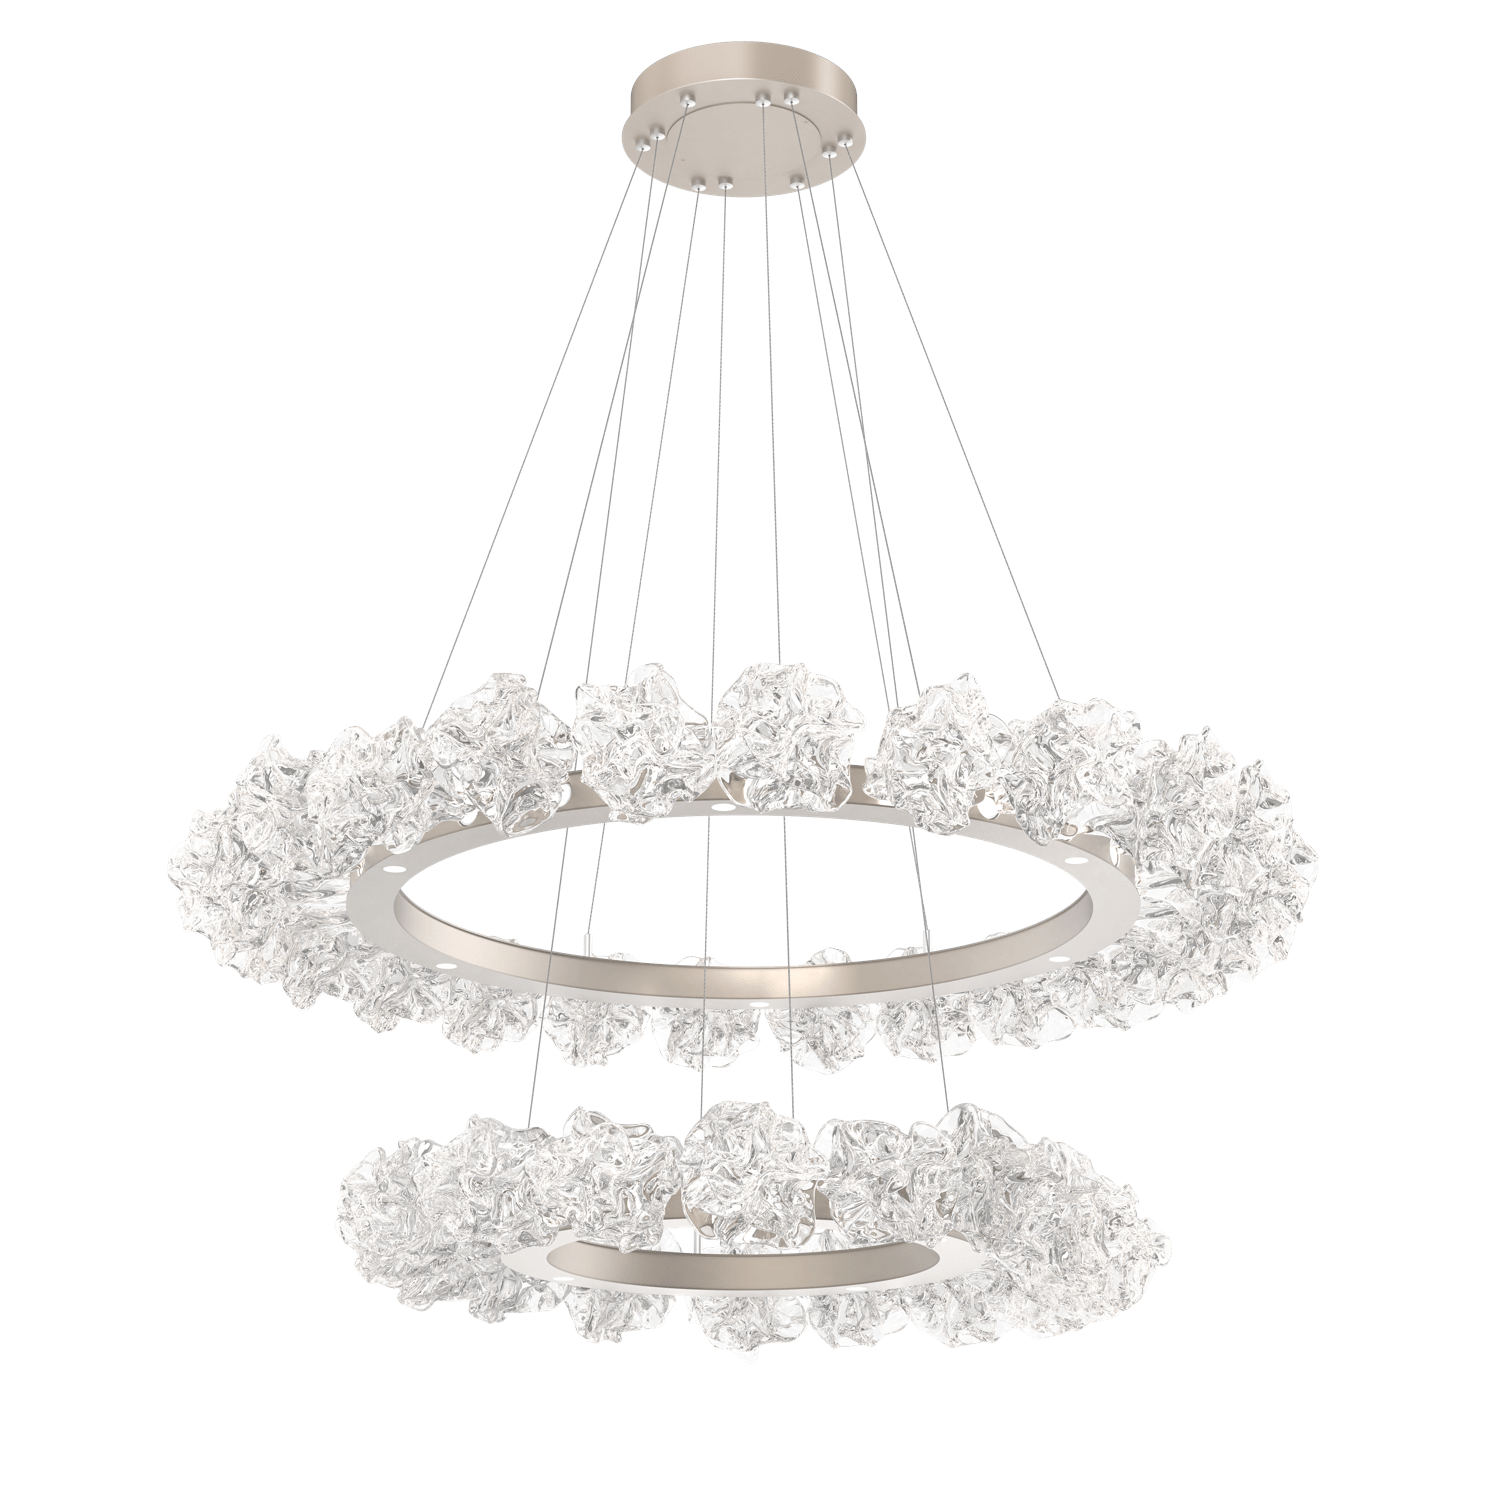 CHB0059-2B-BS-Hammerton-Studio-Blossom-50-inch-two-tier-radial-ring-chandelier-with-metallic-beige-silver-finish-and-clear-handblown-crystal-glass-shades-and-LED-lamping